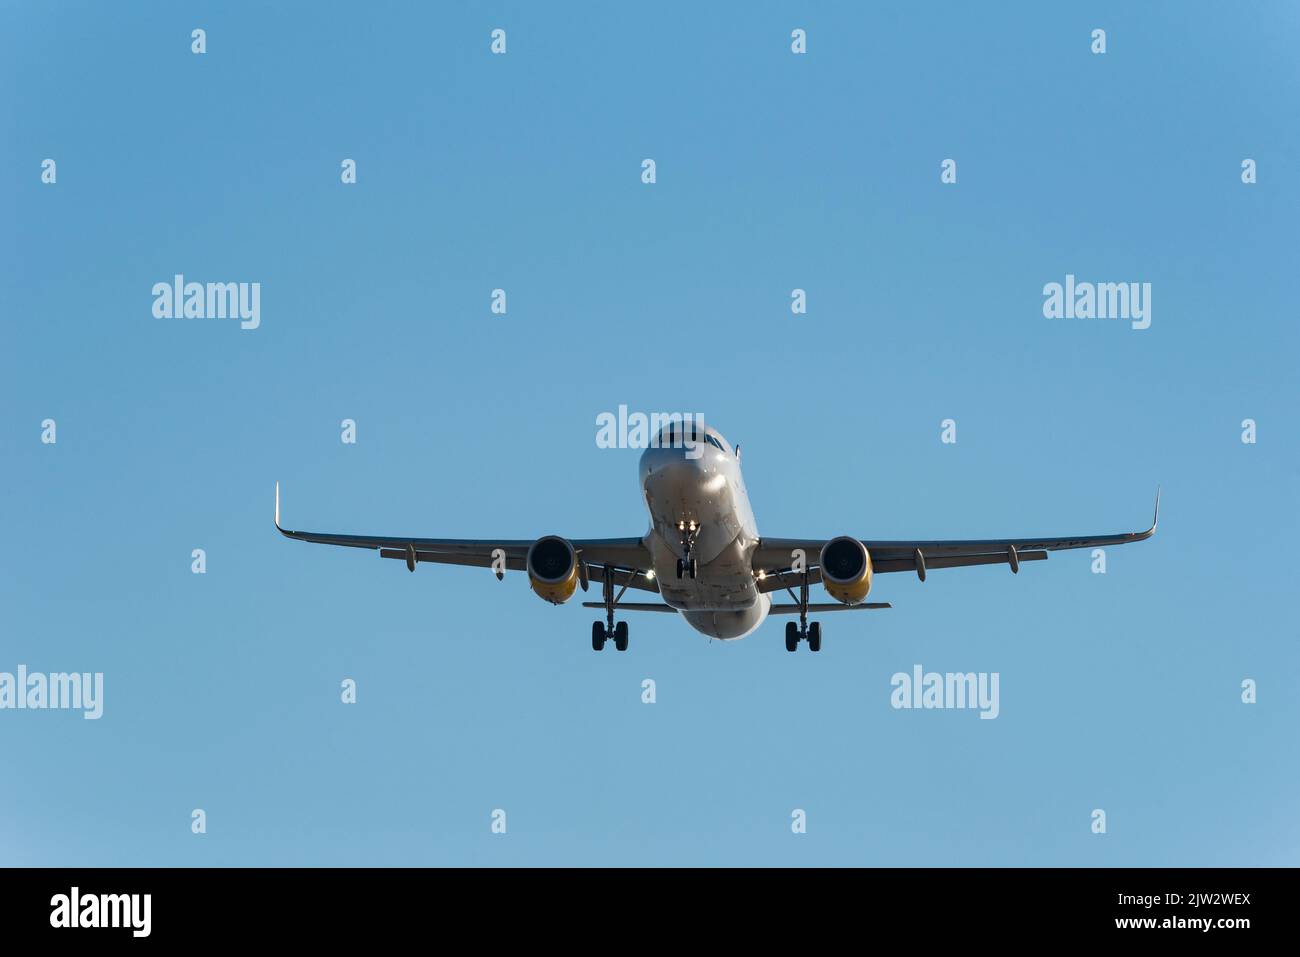 Passenger airplane on approach to the airport landing - stock photo Stock Photo